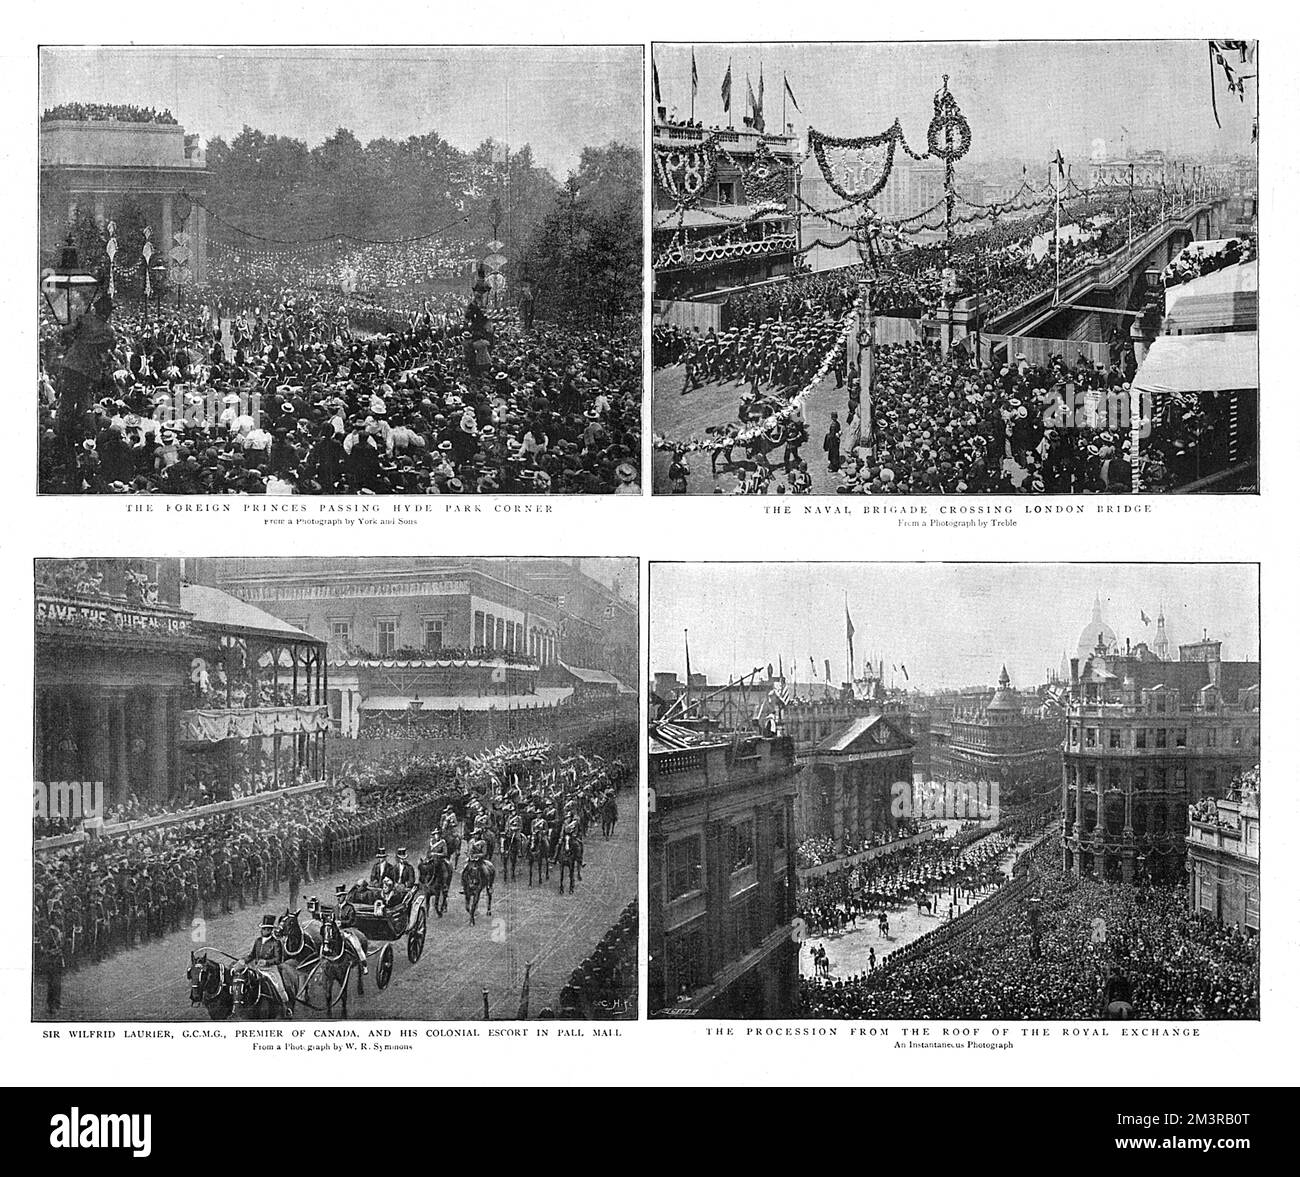 Four views of the procession during Queen Victoria's Jubilee Celebrations on 20 June 1897.  The foreign princes passing Hyde Park Corner (top left), the Naval Brigade crossing London Bridge (top right), Sir Wilfrid Laurier, Premier of Canada, and his colonial escort in Pall Mall (bottom left), and a view from the roof of the Royal Exchange (bottom right).     Date: 20 June 1897 Stock Photo